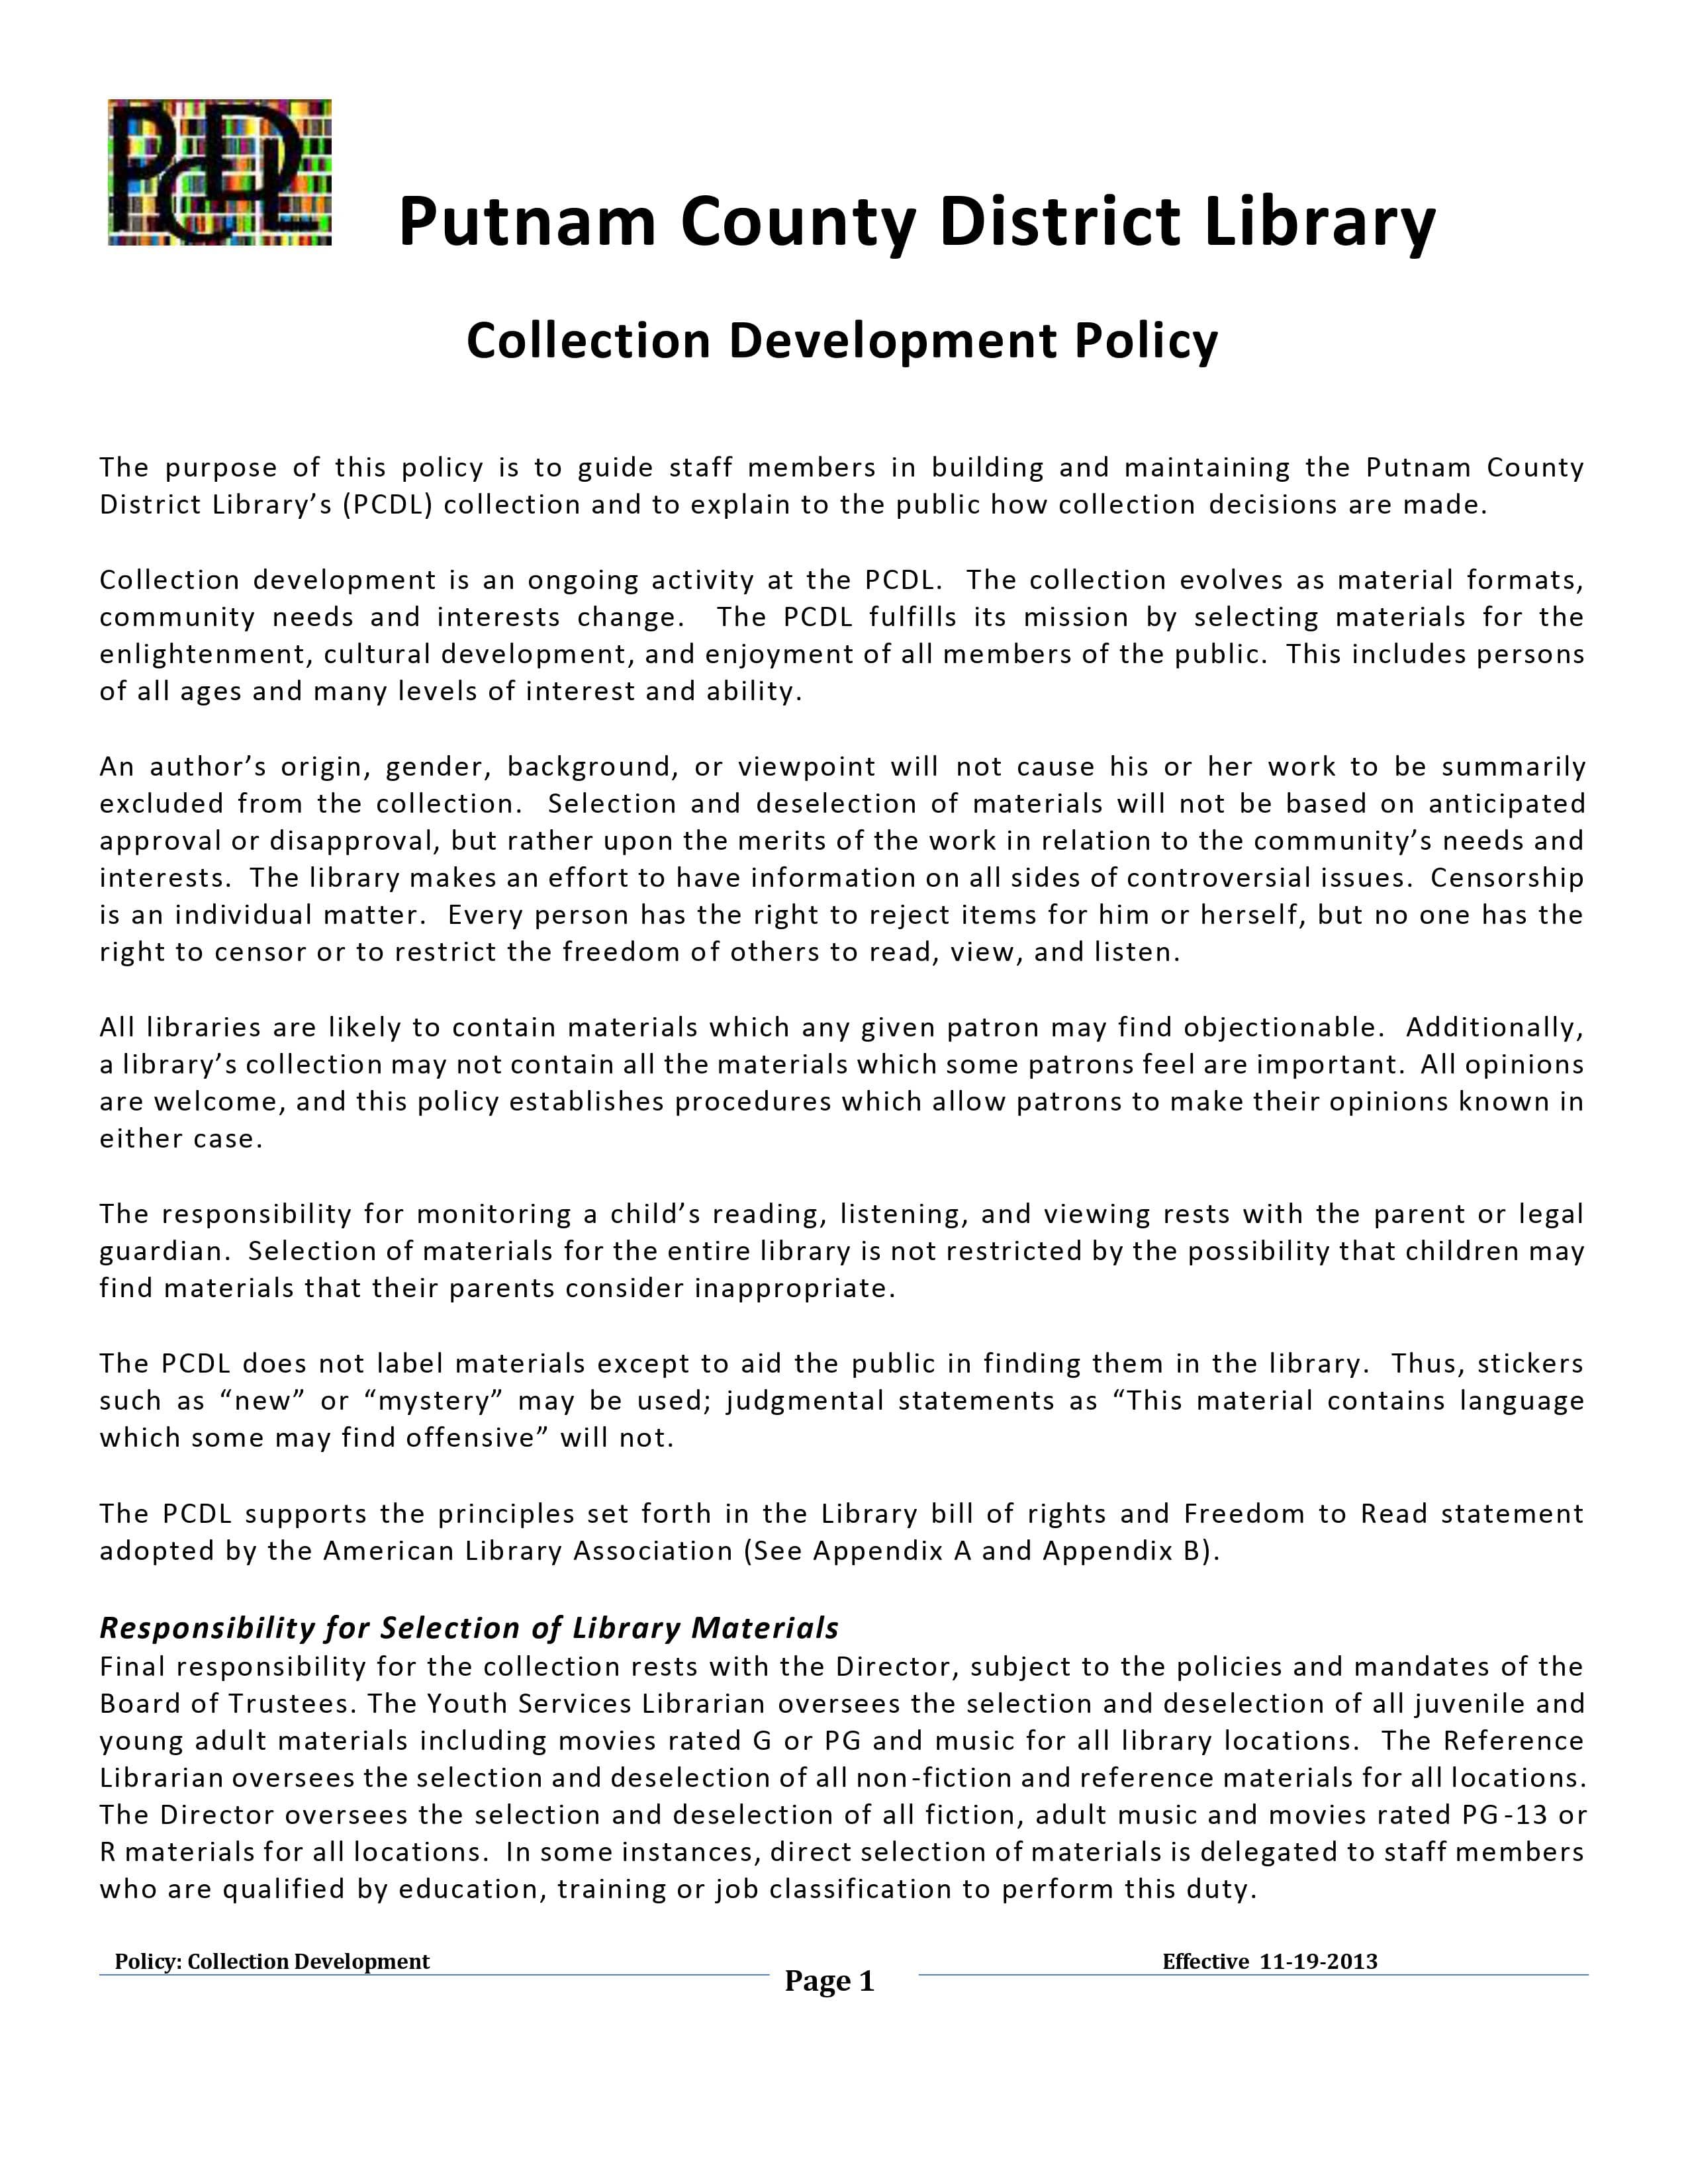 PCDL Collection Development Policy Page 1